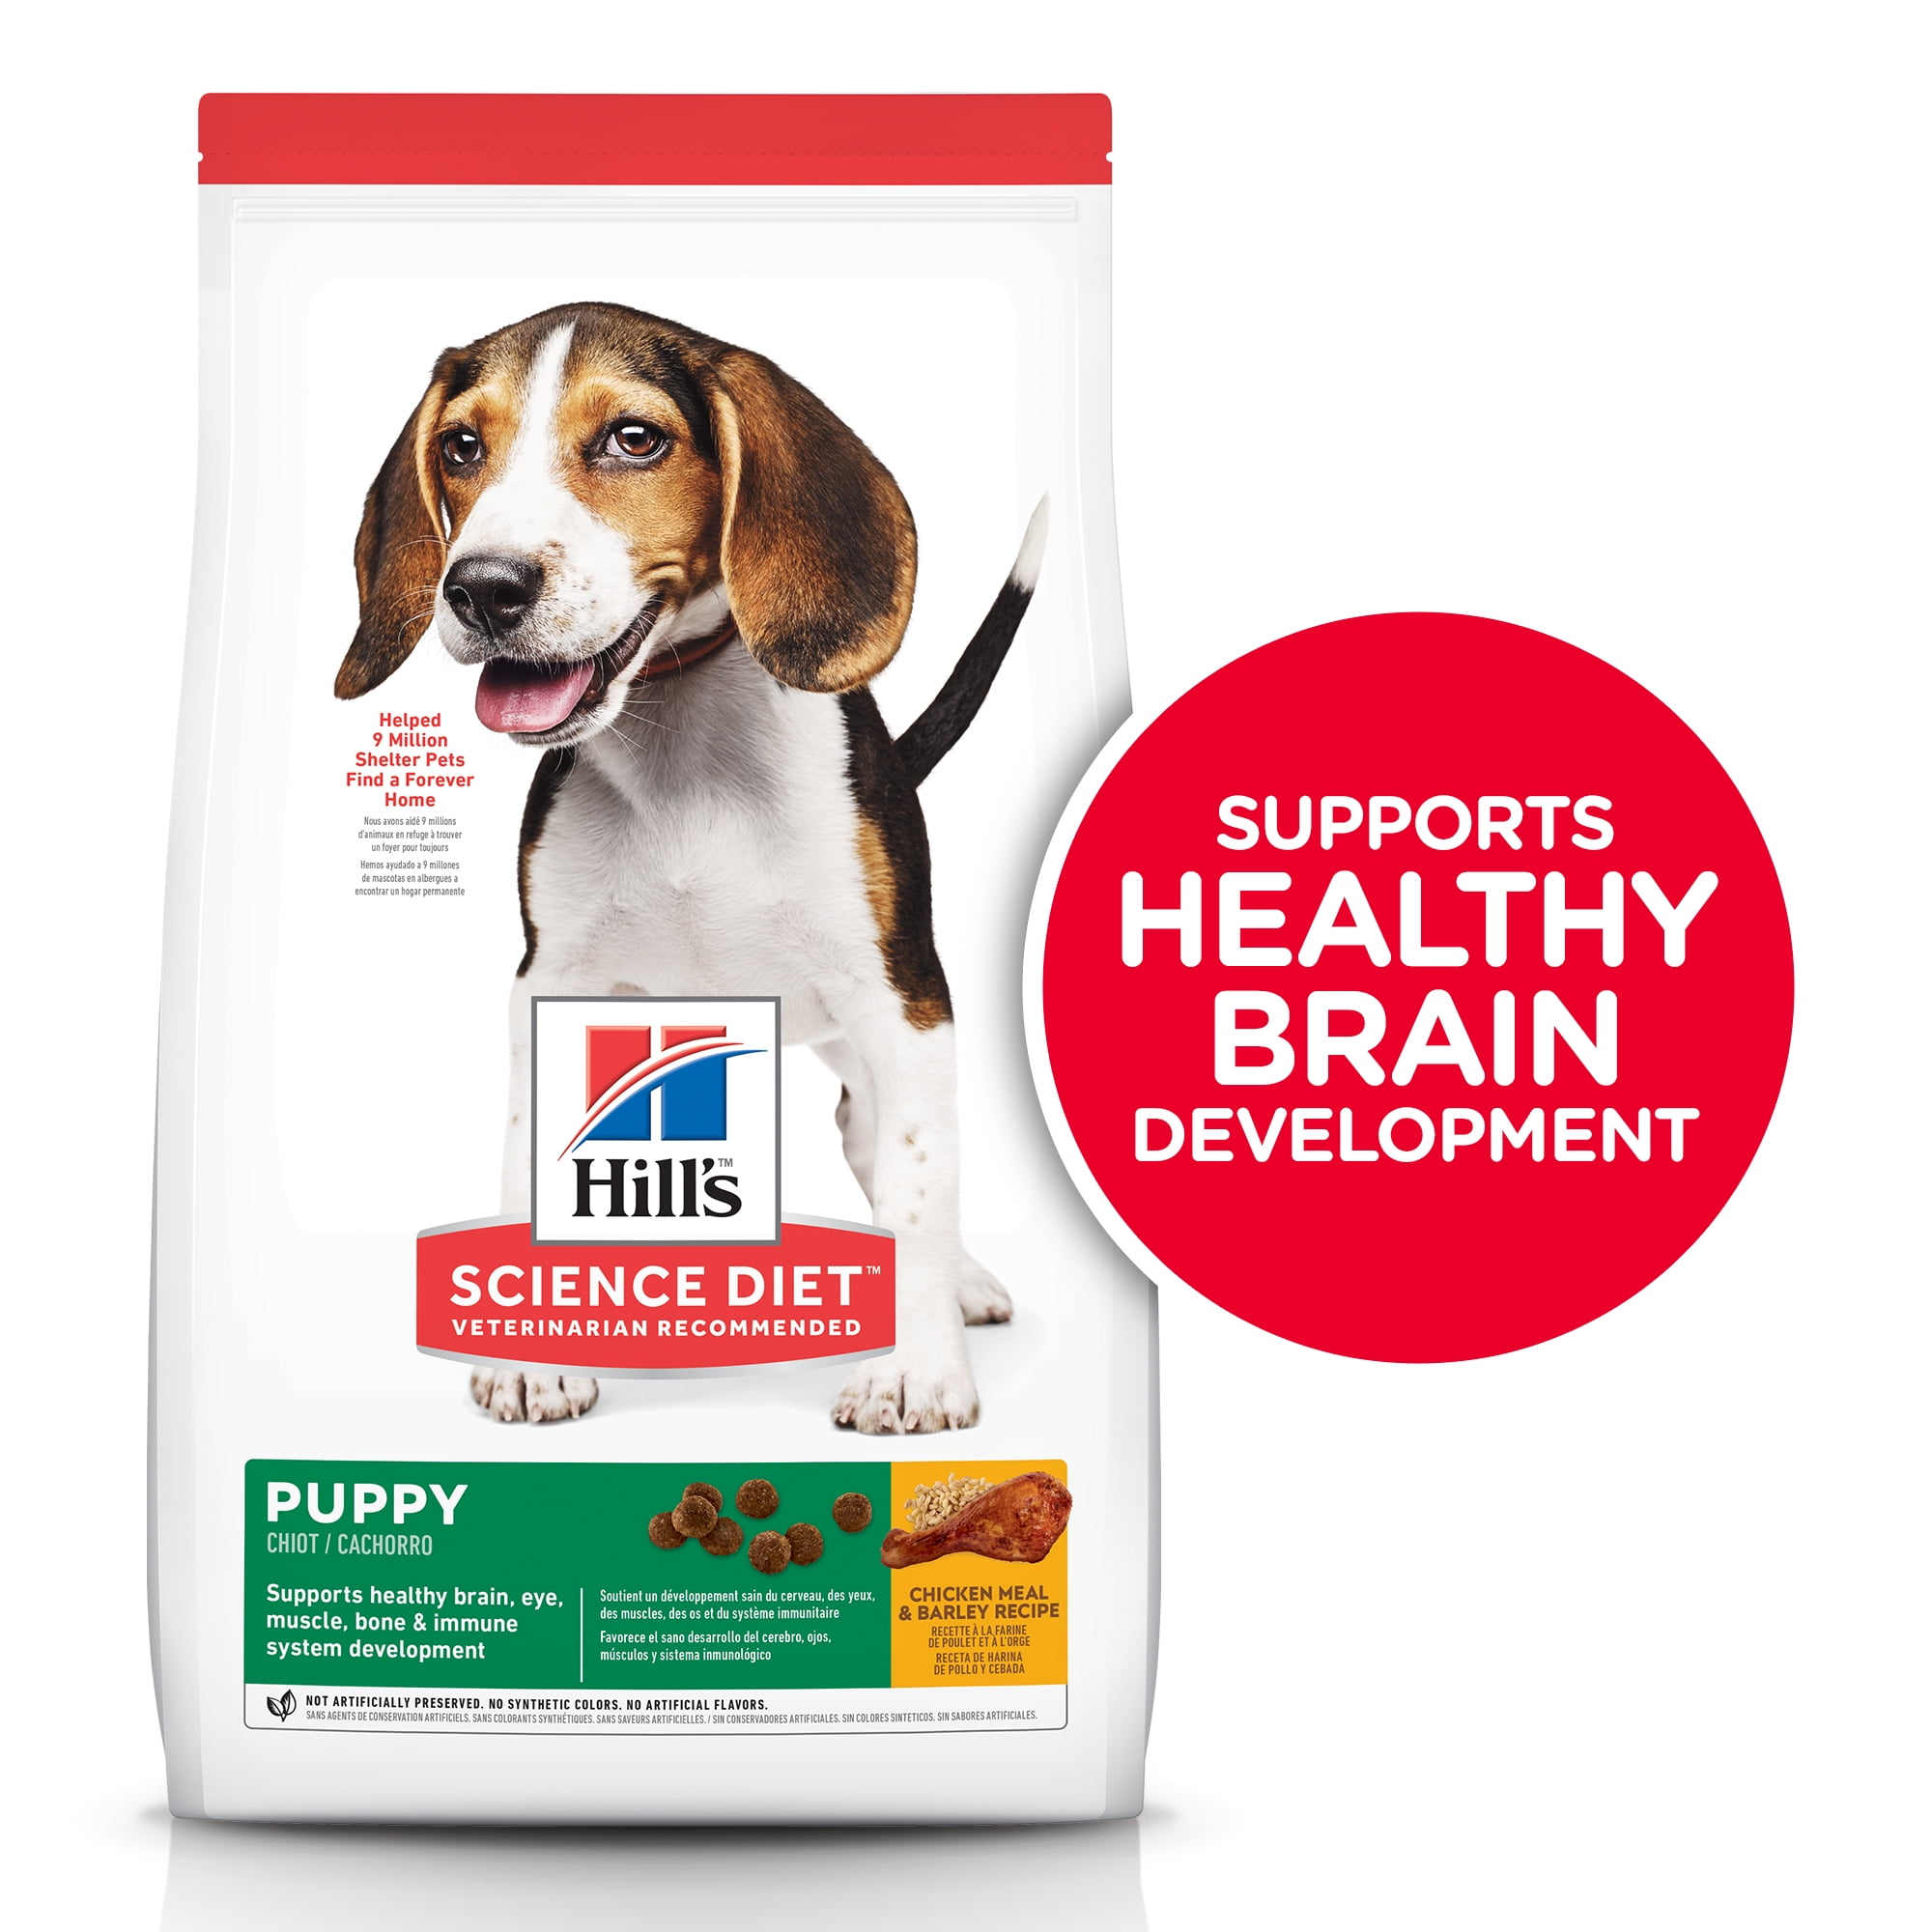 hill's science diet puppy small bites